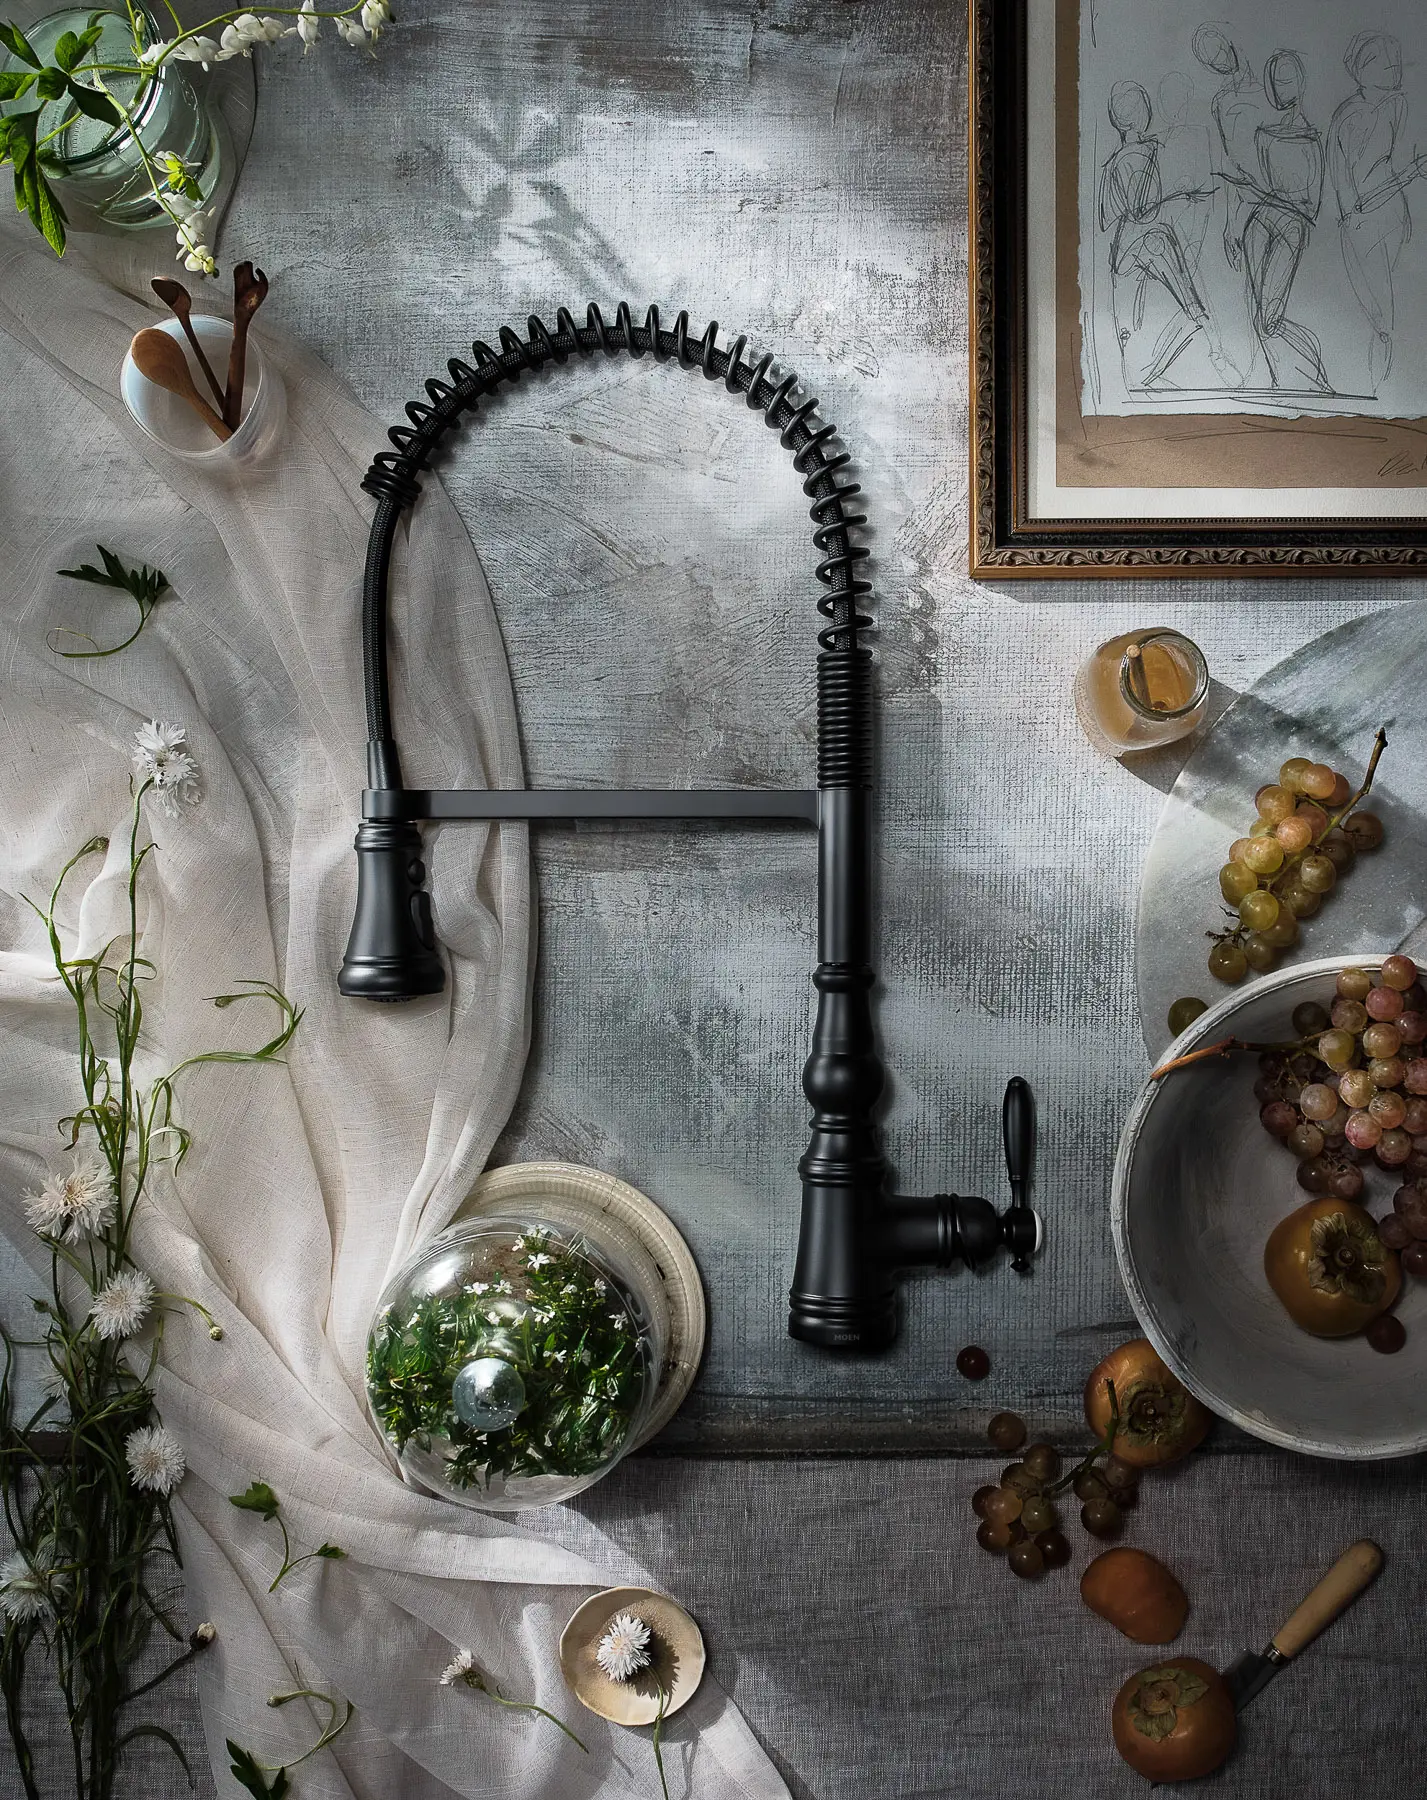 black faucet with spring handle